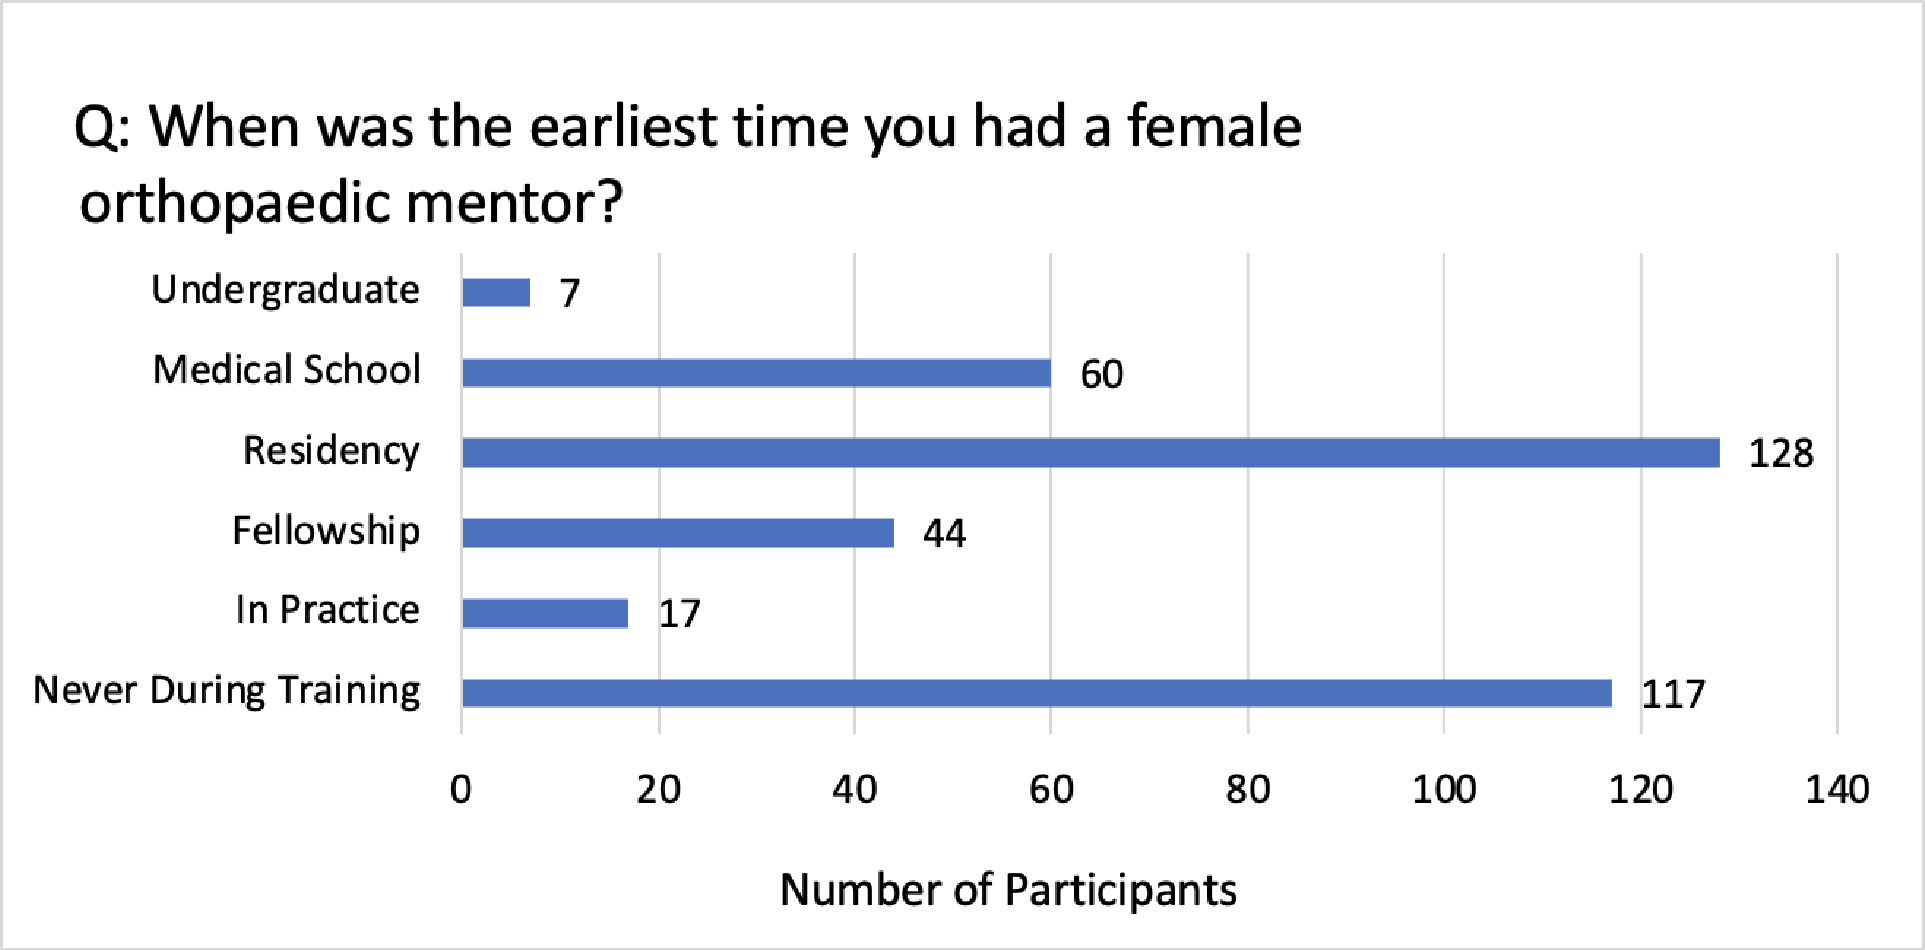 Fig. 2 
          The earliest time at which respondents had a female orthopaedic mentor.
        